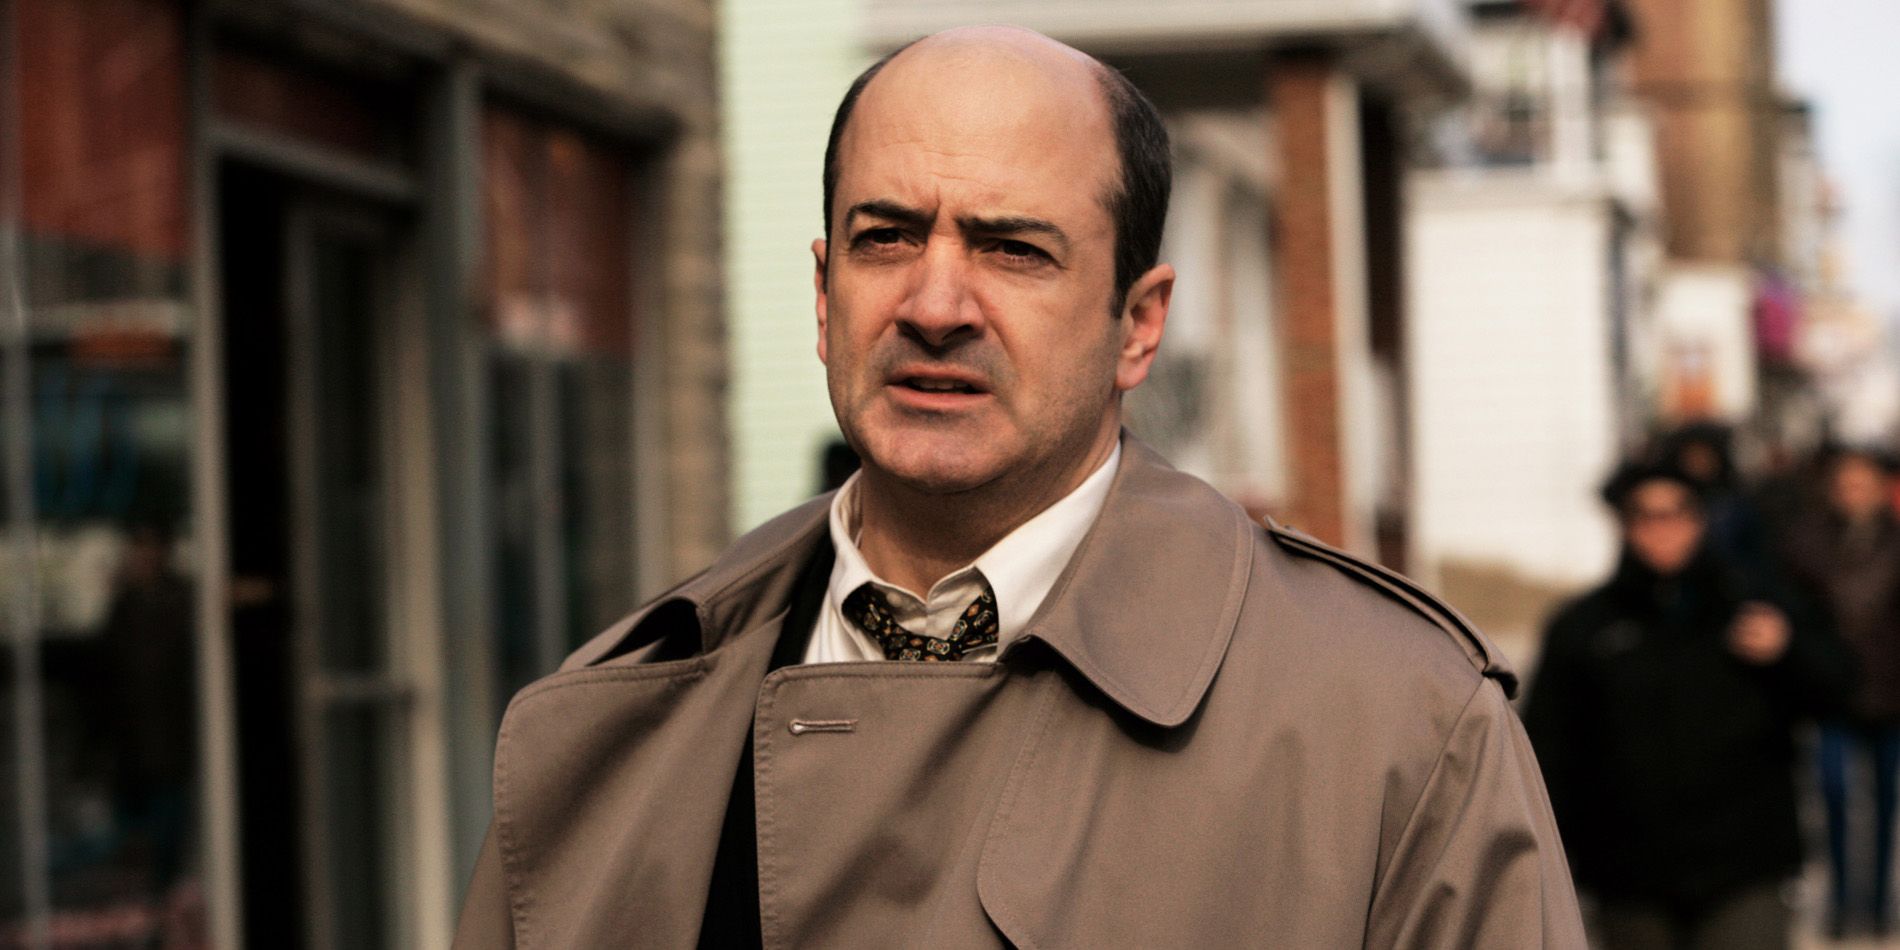 The Sopranos Law Enforcement Officers Ranked From Heroic To Most Villainous